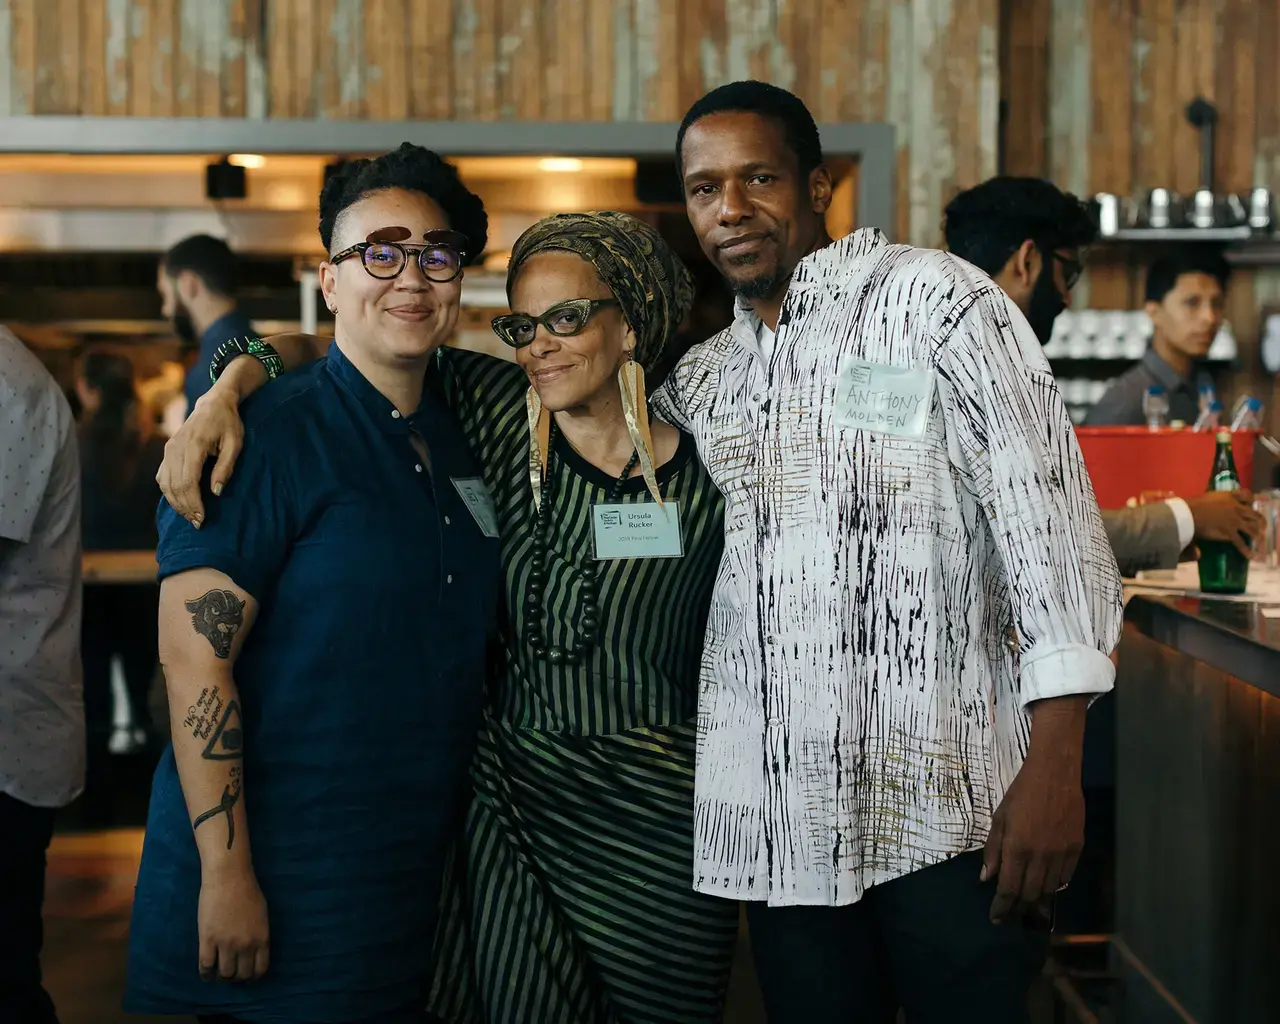 From left to right: Meg Onli of Institute of Contemporary Art, 2018 Pew Fellow Ursula Rucker, and Anthony Molden. Photo by Sabina Sister.